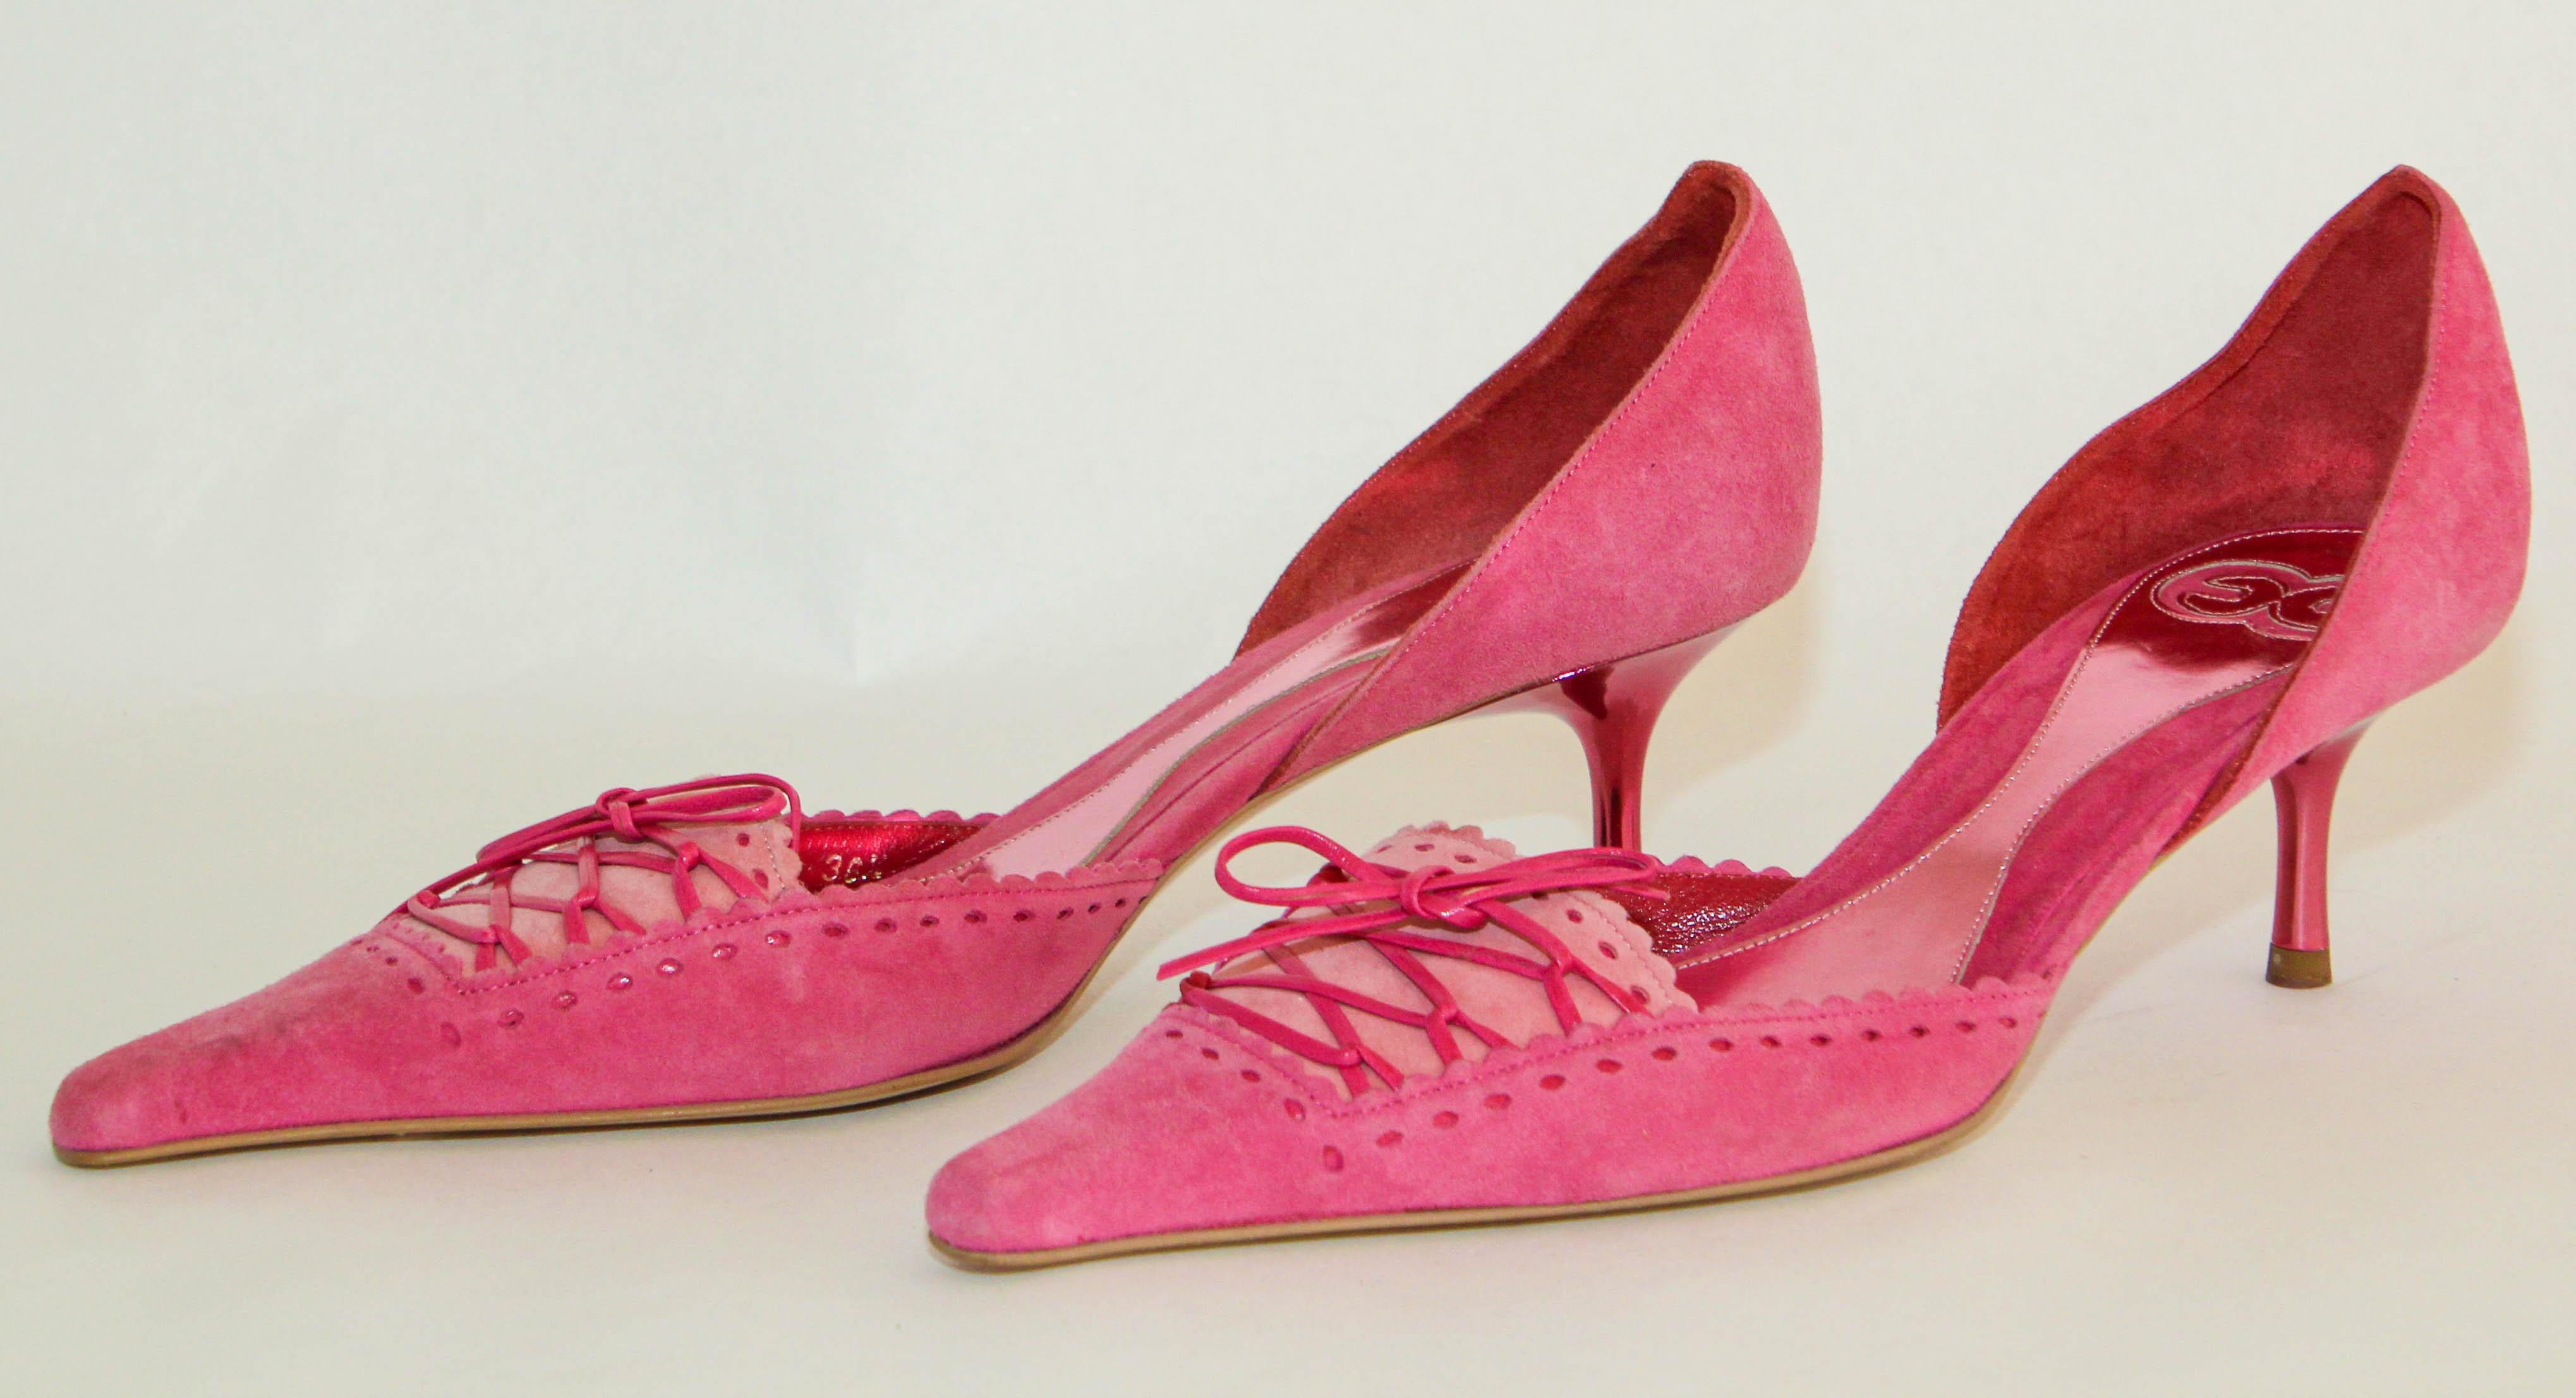 Escada pink suede pumps with leather details heels shoes Italy 36.5 Size US 6 1/2. 
These dream-like sandals from Escada are crafted from hot pink fuschia suede and leather lace with pointed toes and lace detailing. 
Beautiful pink Escada runway